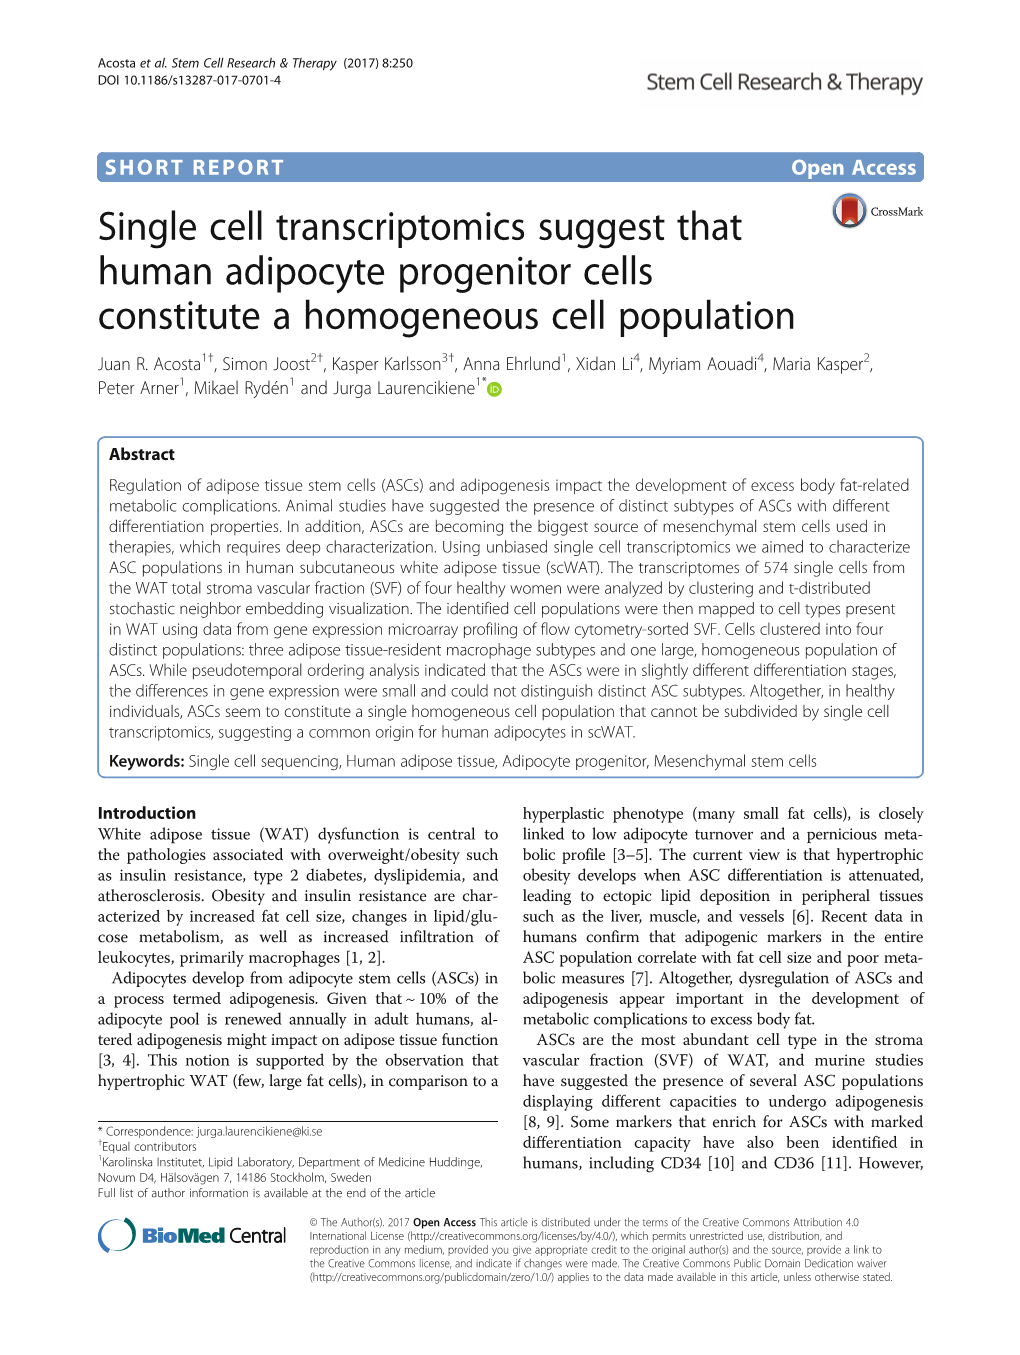 Single Cell Transcriptomics Suggest That Human Adipocyte Progenitor Cells Constitute a Homogeneous Cell Population Juan R